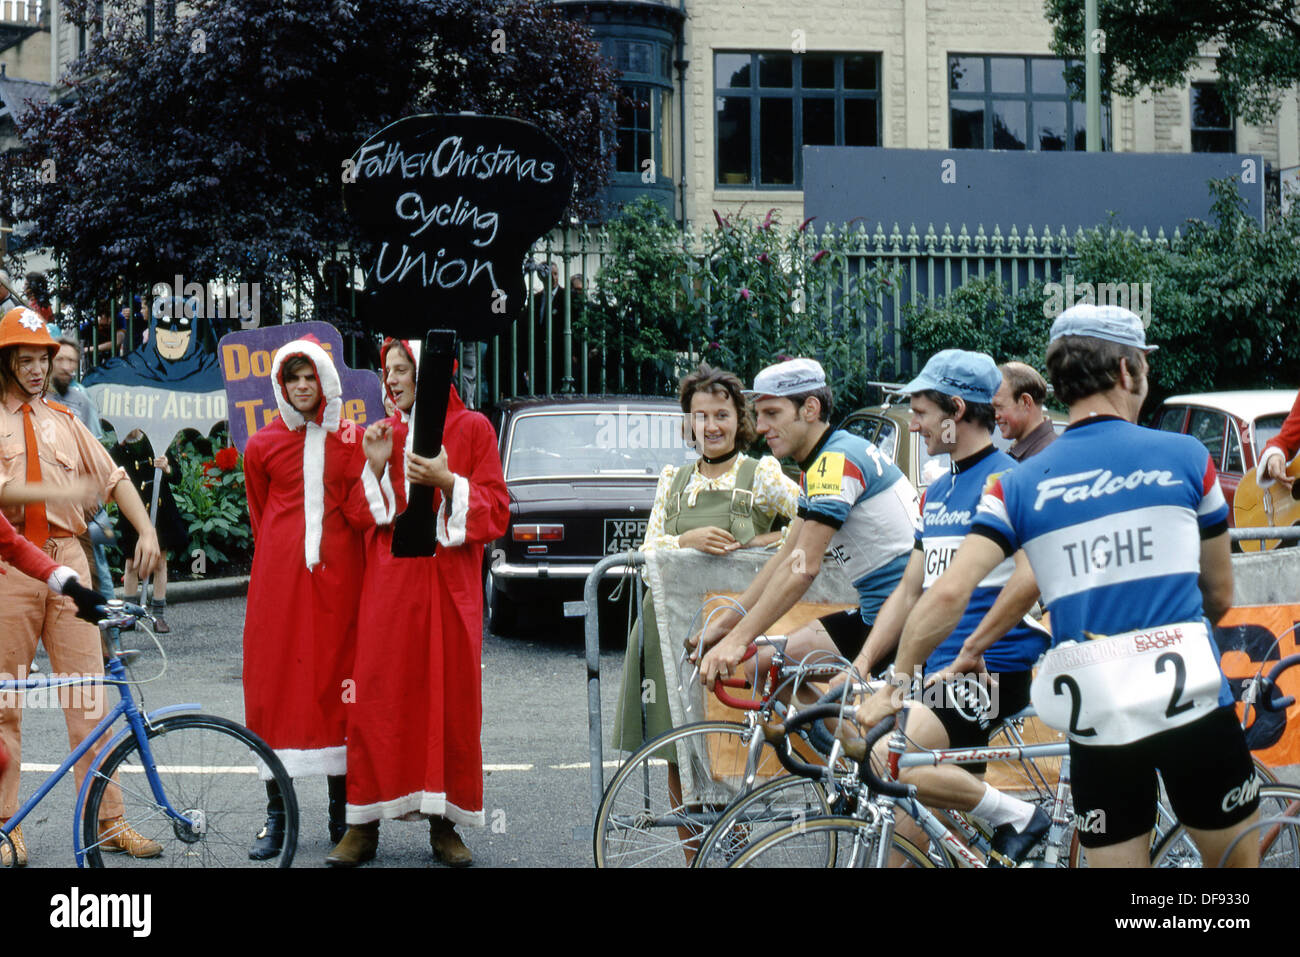 1970s, picture of spectators at the start of a road cycling event, two of who are dressed in red robes as santa claus, one holding a banner saying 'Father Christmas Cycling Union'. Stock Photo